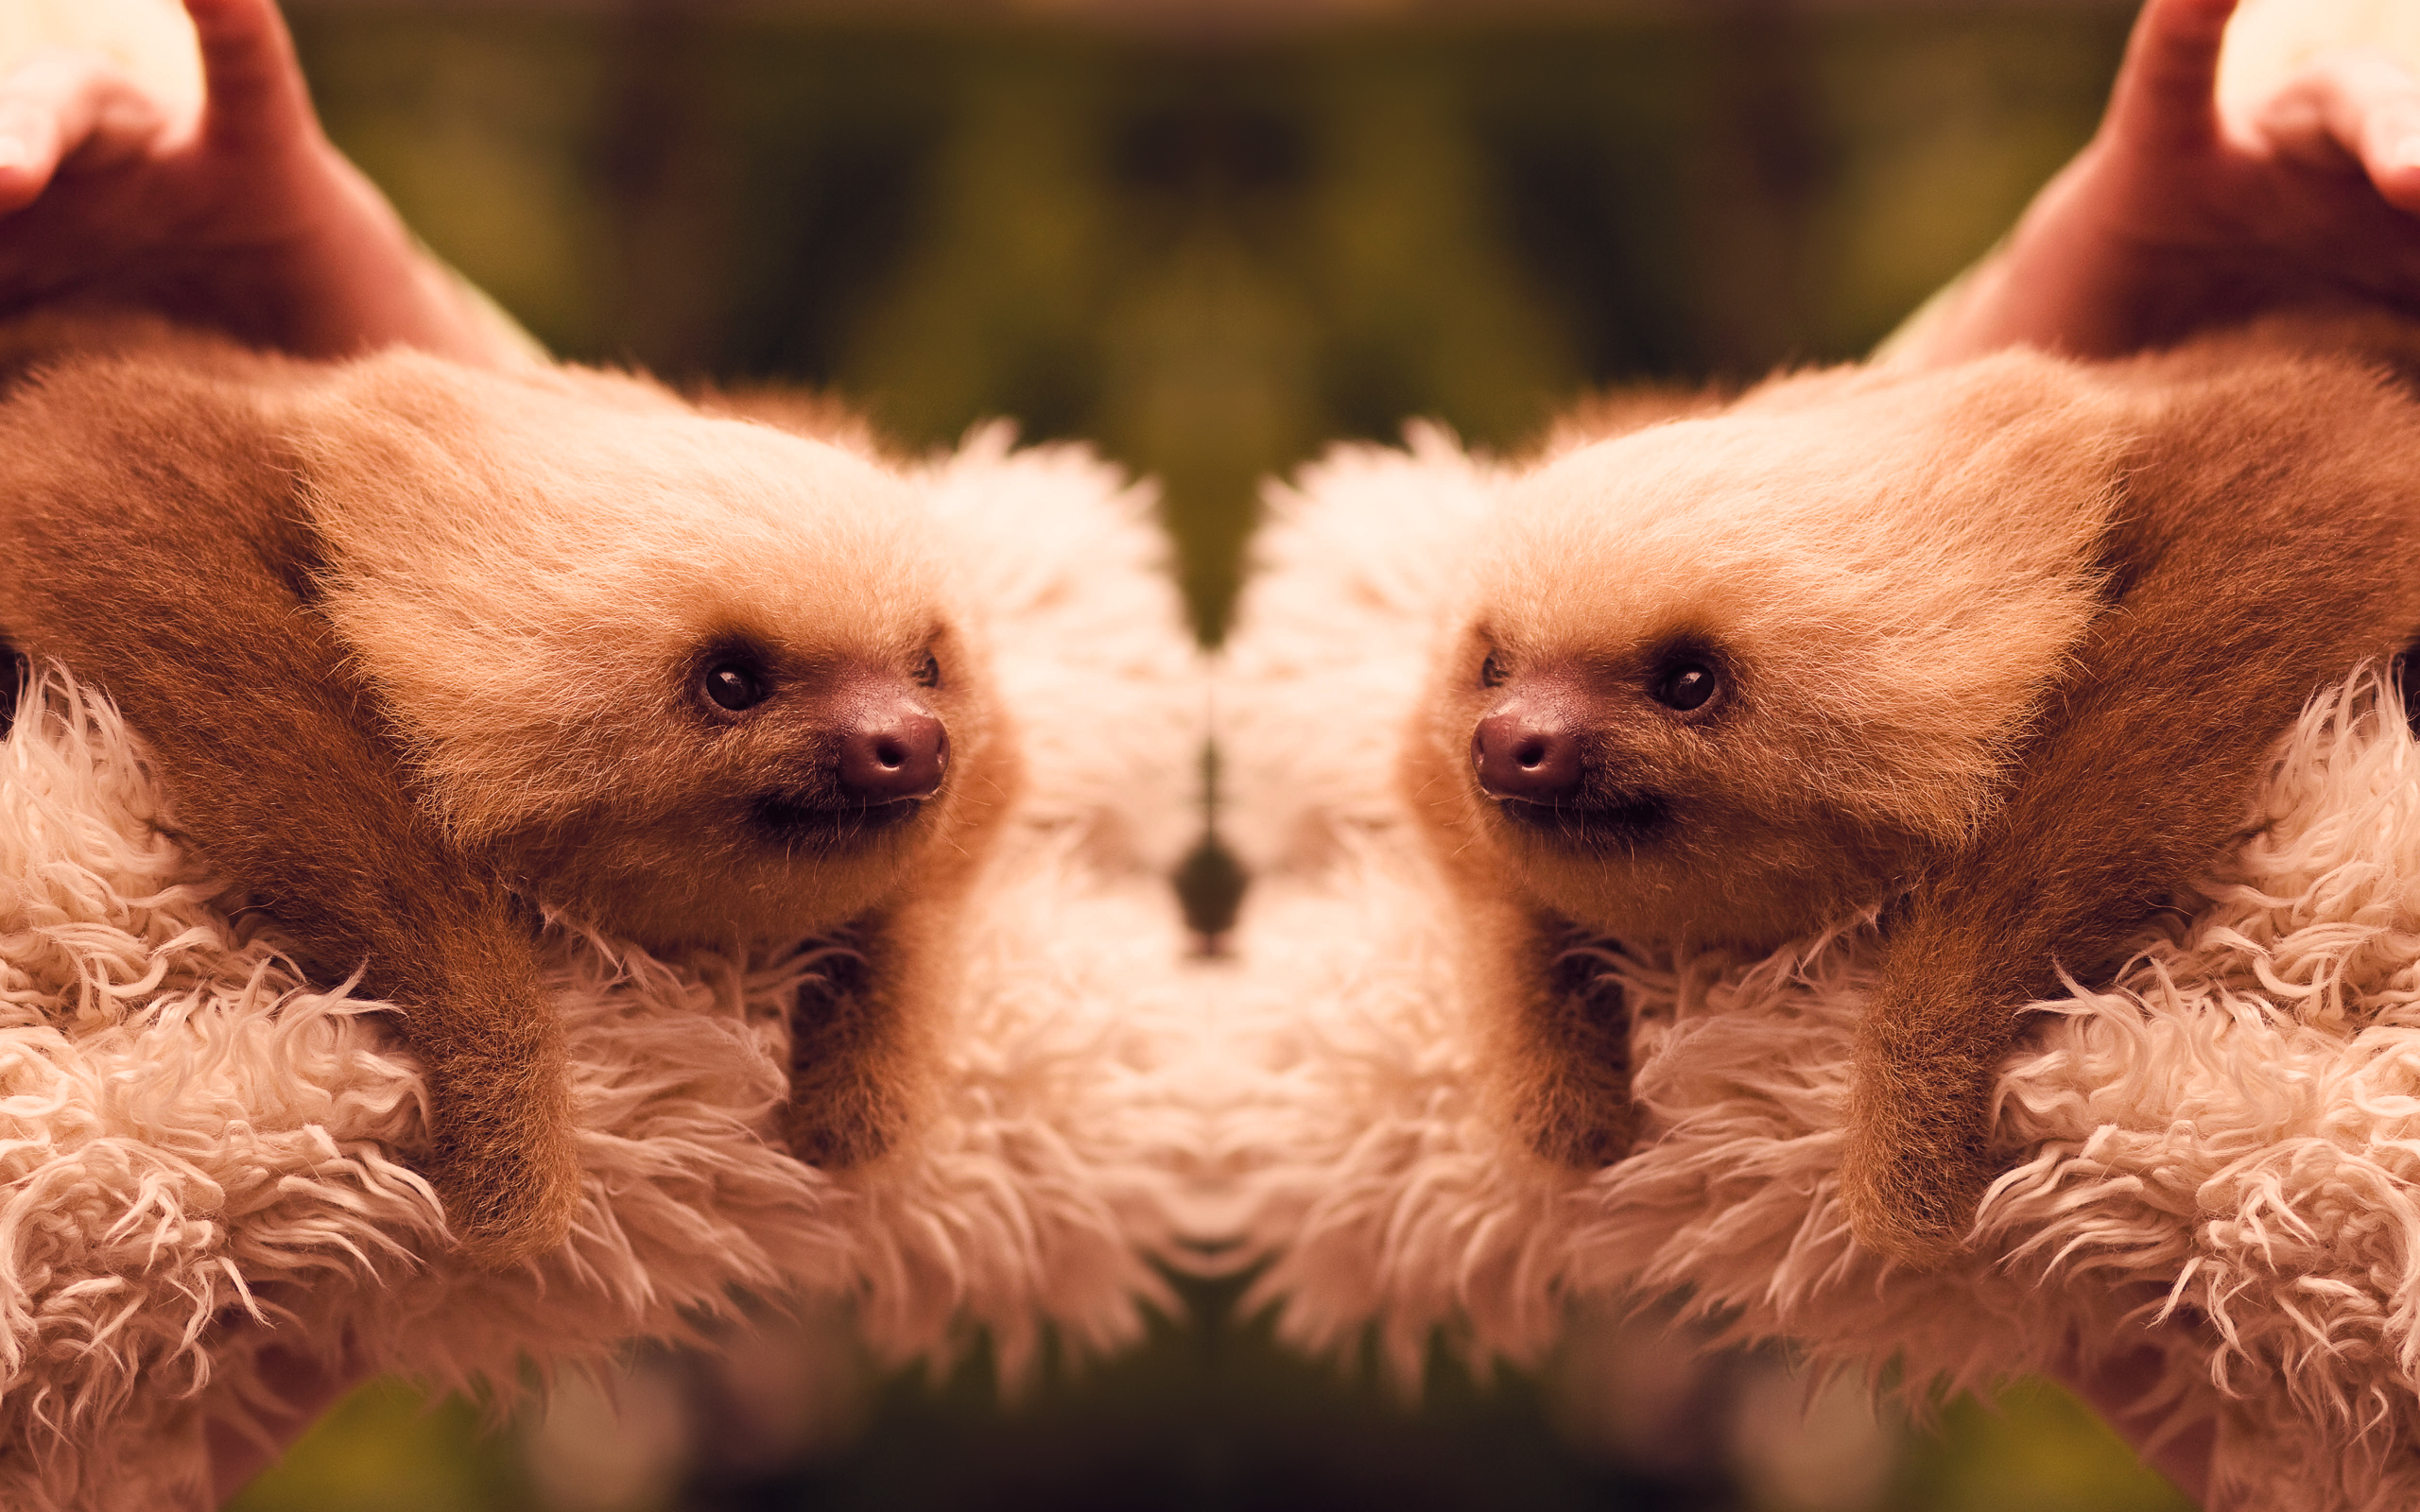 Baby Sloth Wallpaper Pictures